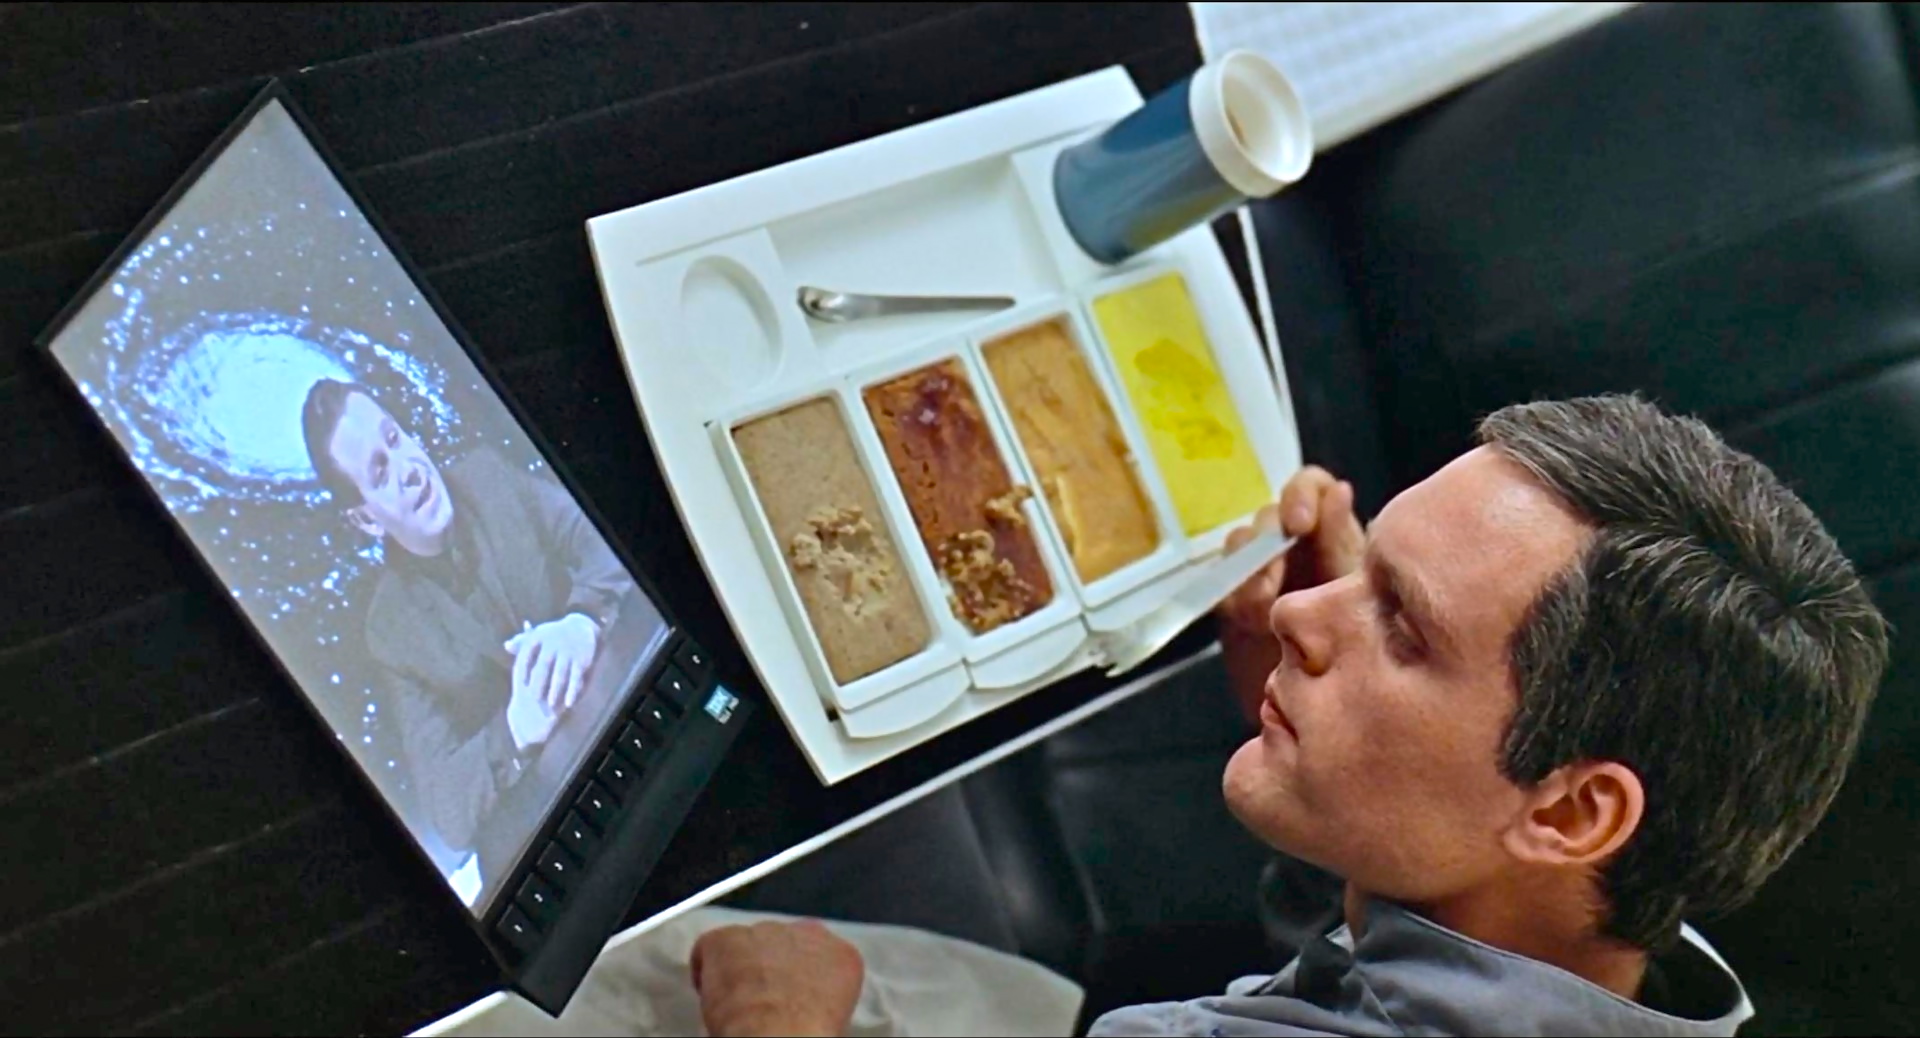 A tablet as portrayed in 2001: A Space Odyssey